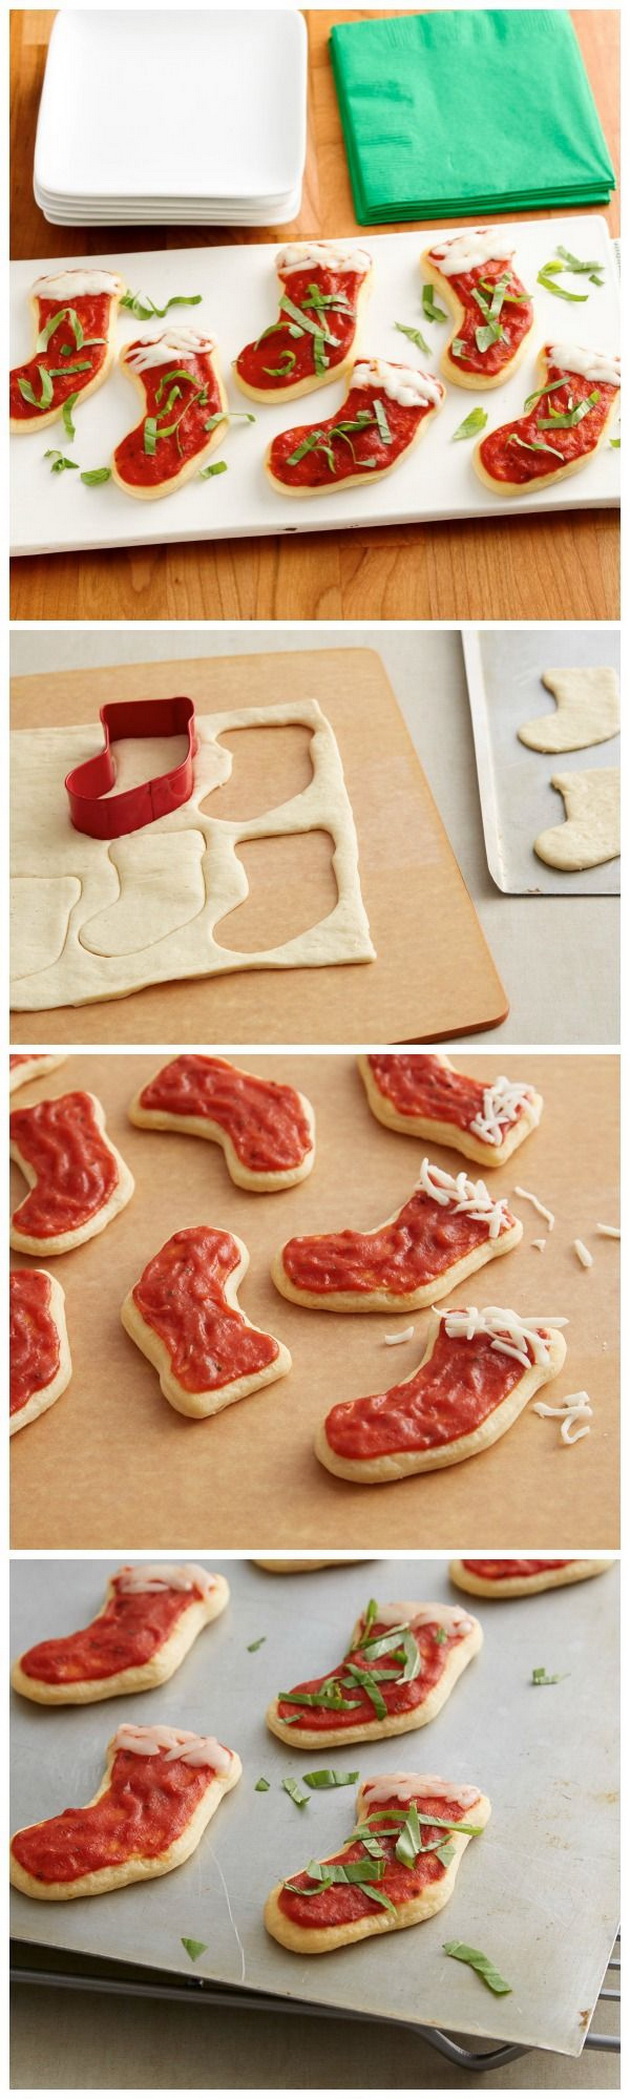 10-Ideas-How-to-Decorate-Your-Christmas-Food-9